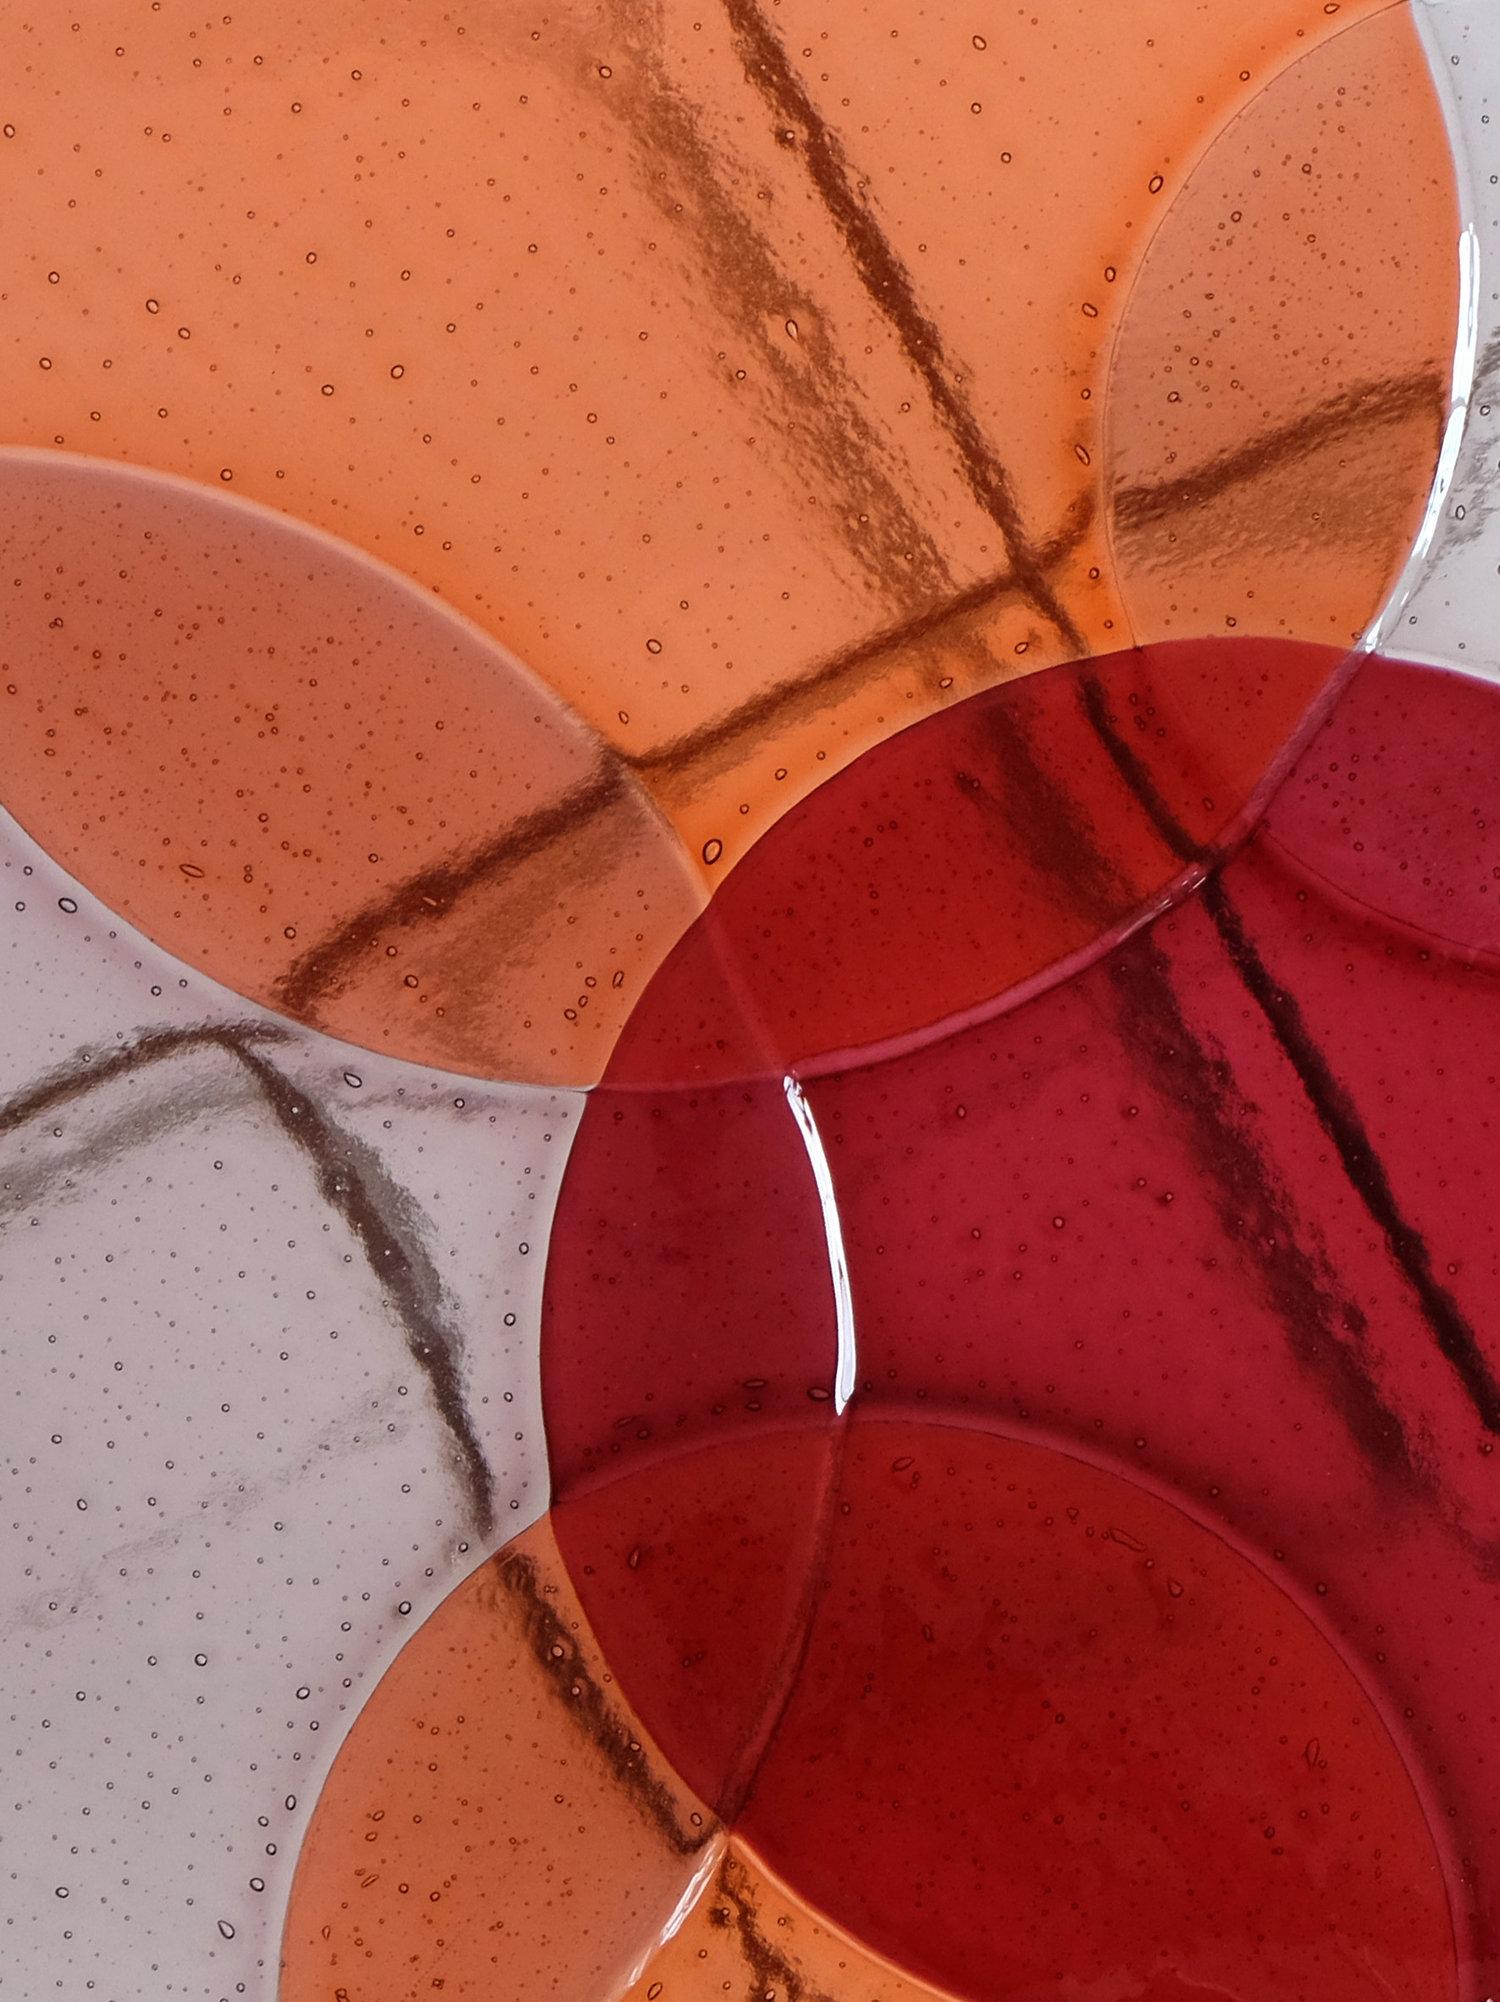 The side tables by Sebastian Herkner are suspended drops of colored glass which found their inspiration in the particularity of the glass fusing technique. Through the process the perfectly cut glass circles are transformed: their contours get